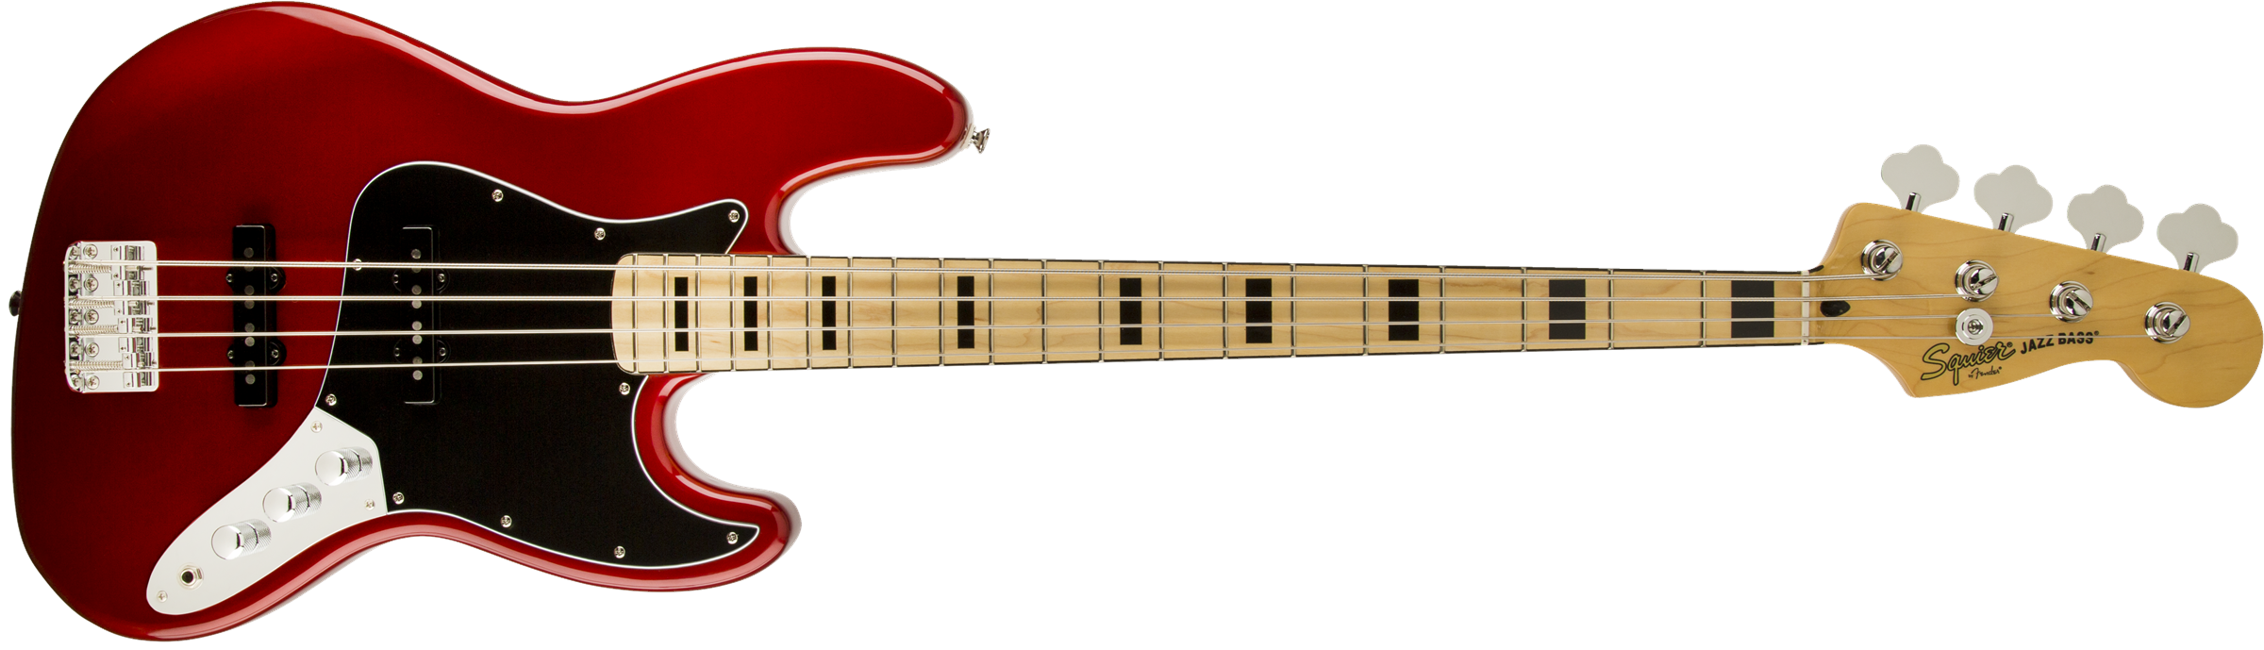 Fender Squier Vintage Modified 70's Jazz Bass (Candy Apple Red)